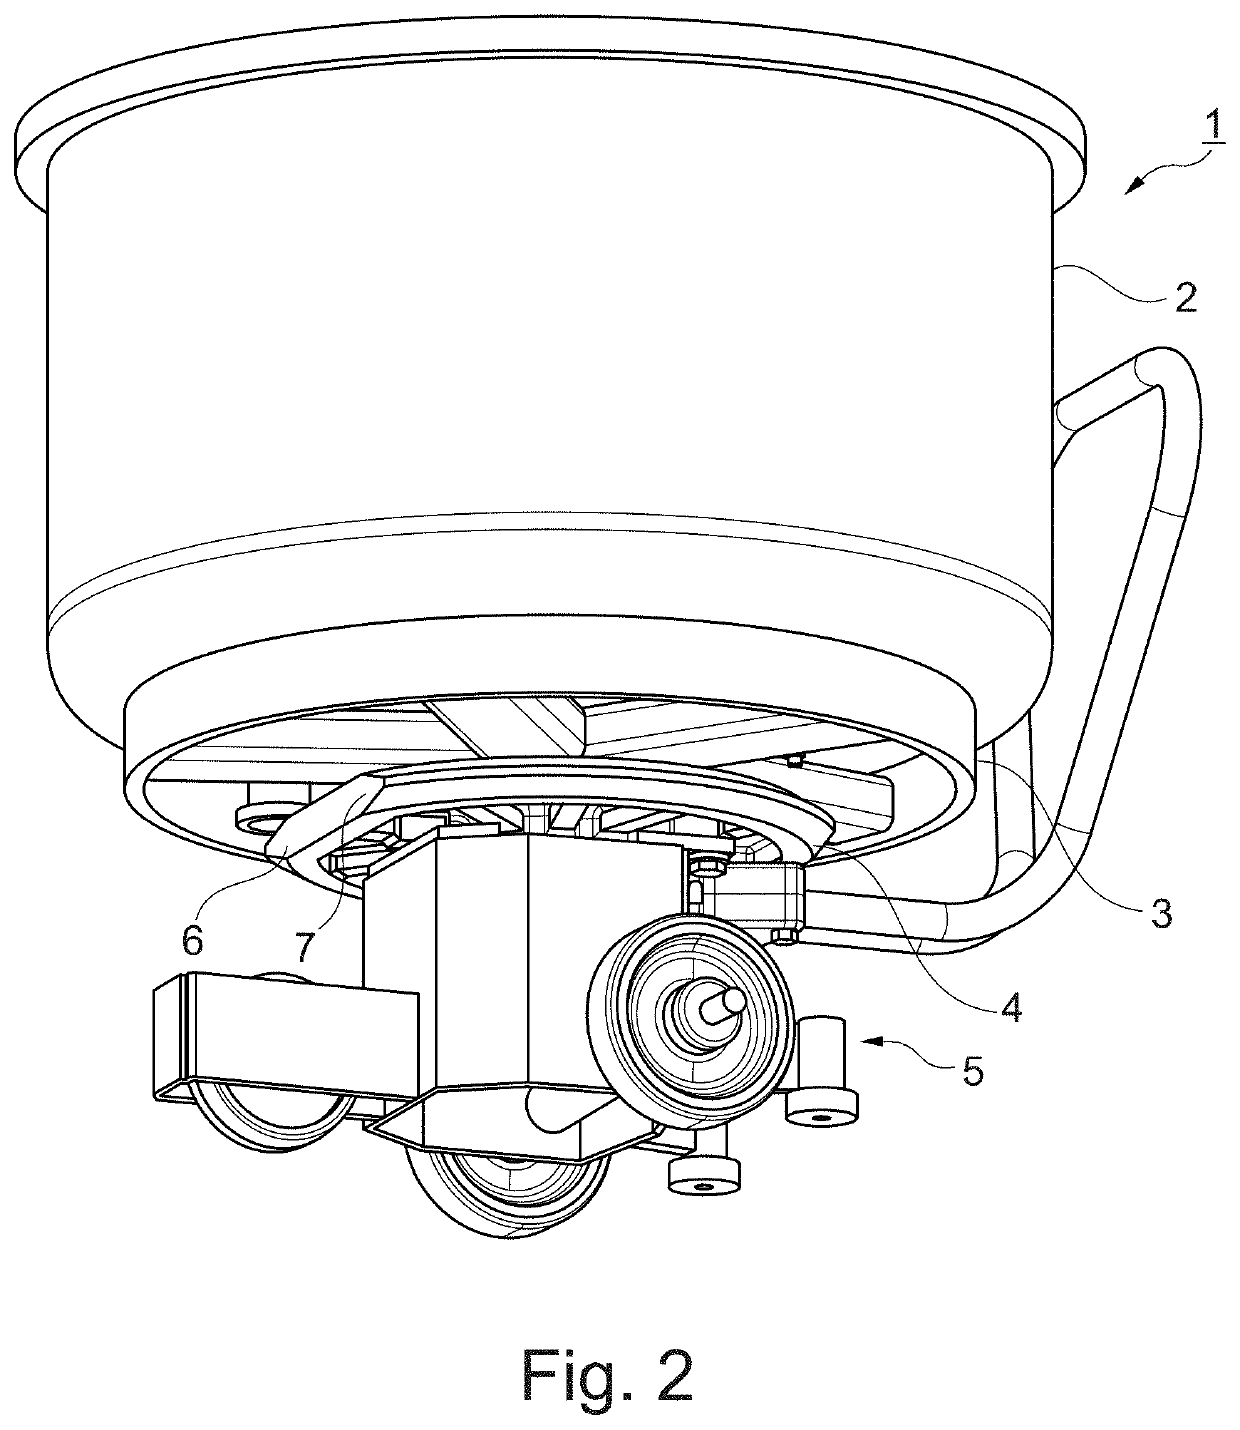 Kneading machine having a tongs locking mechanism for fixing a bowl trolley